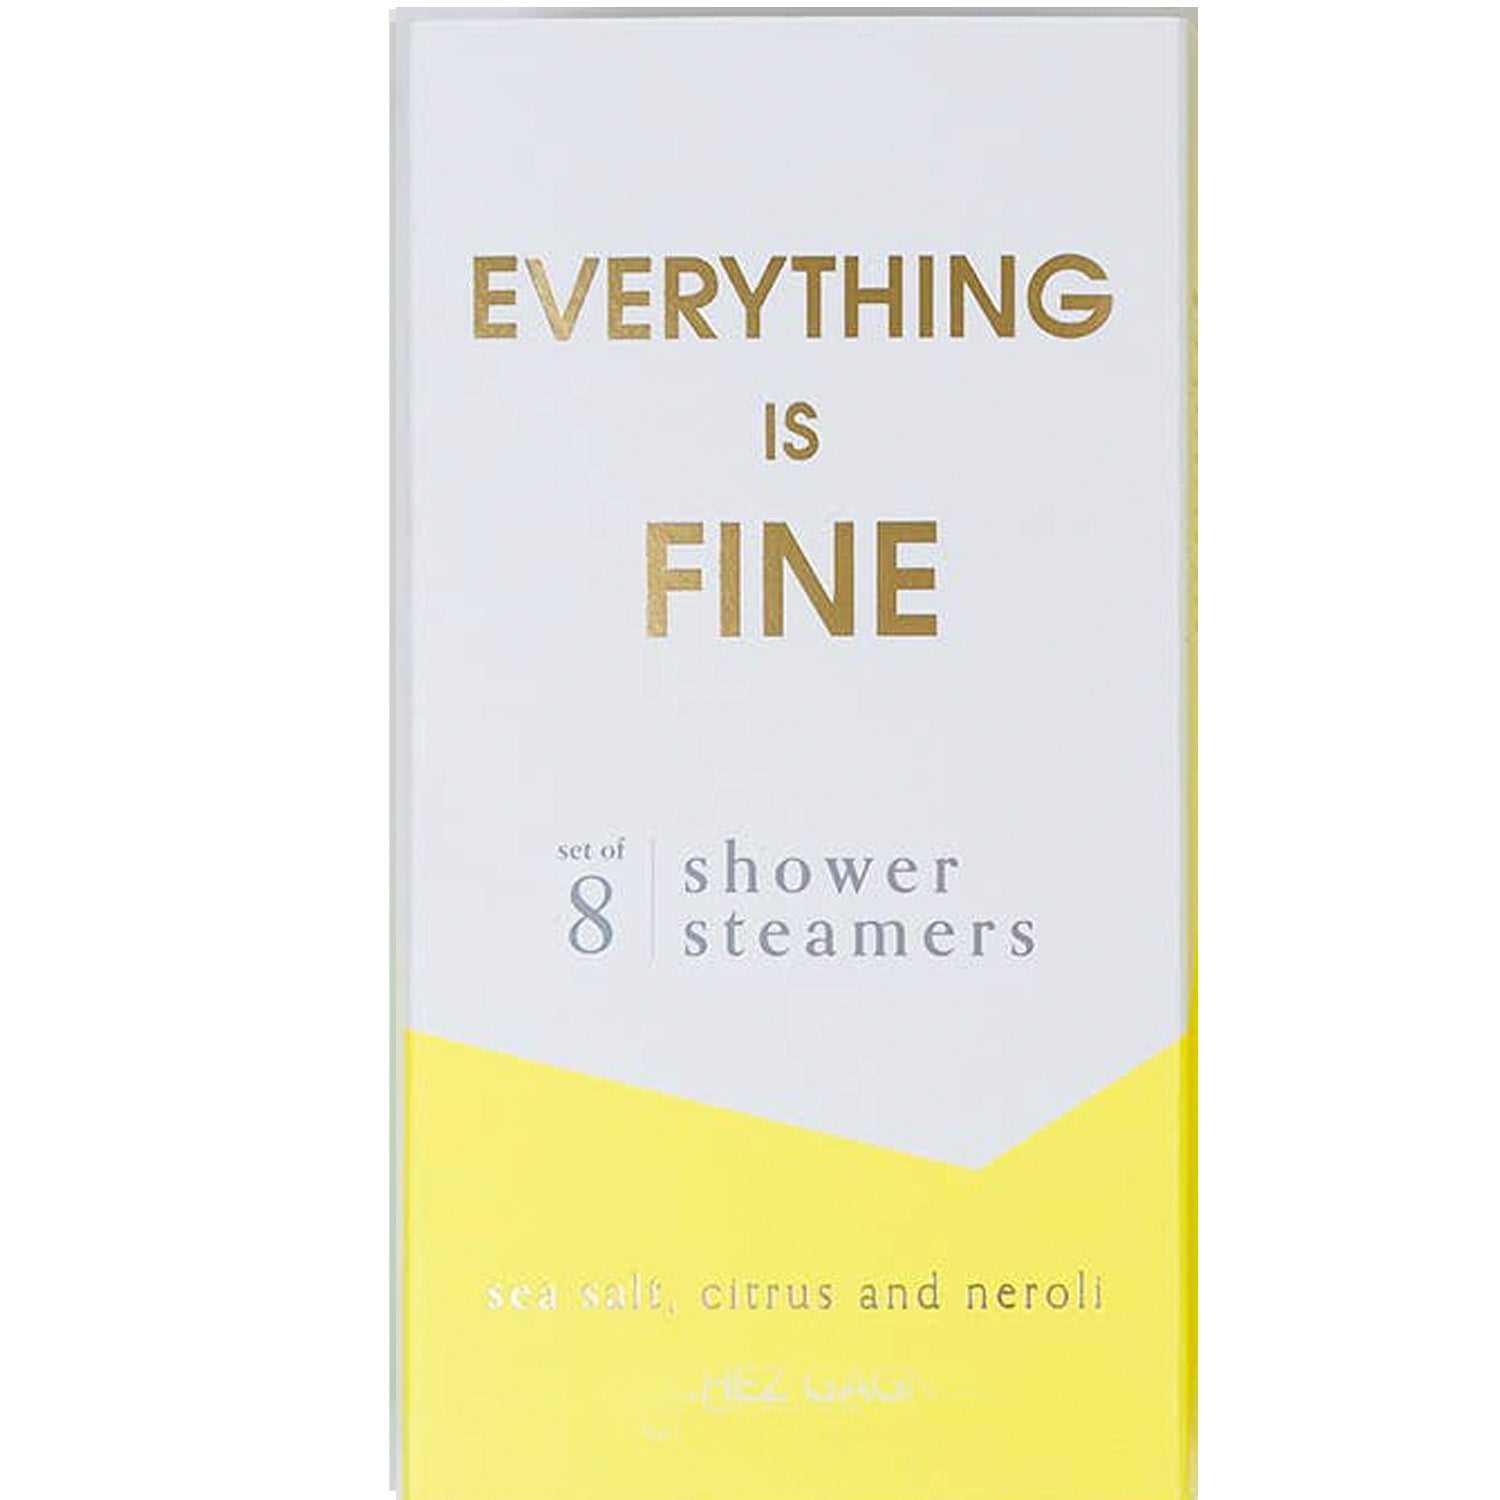 Everything is fine Shower Steamers